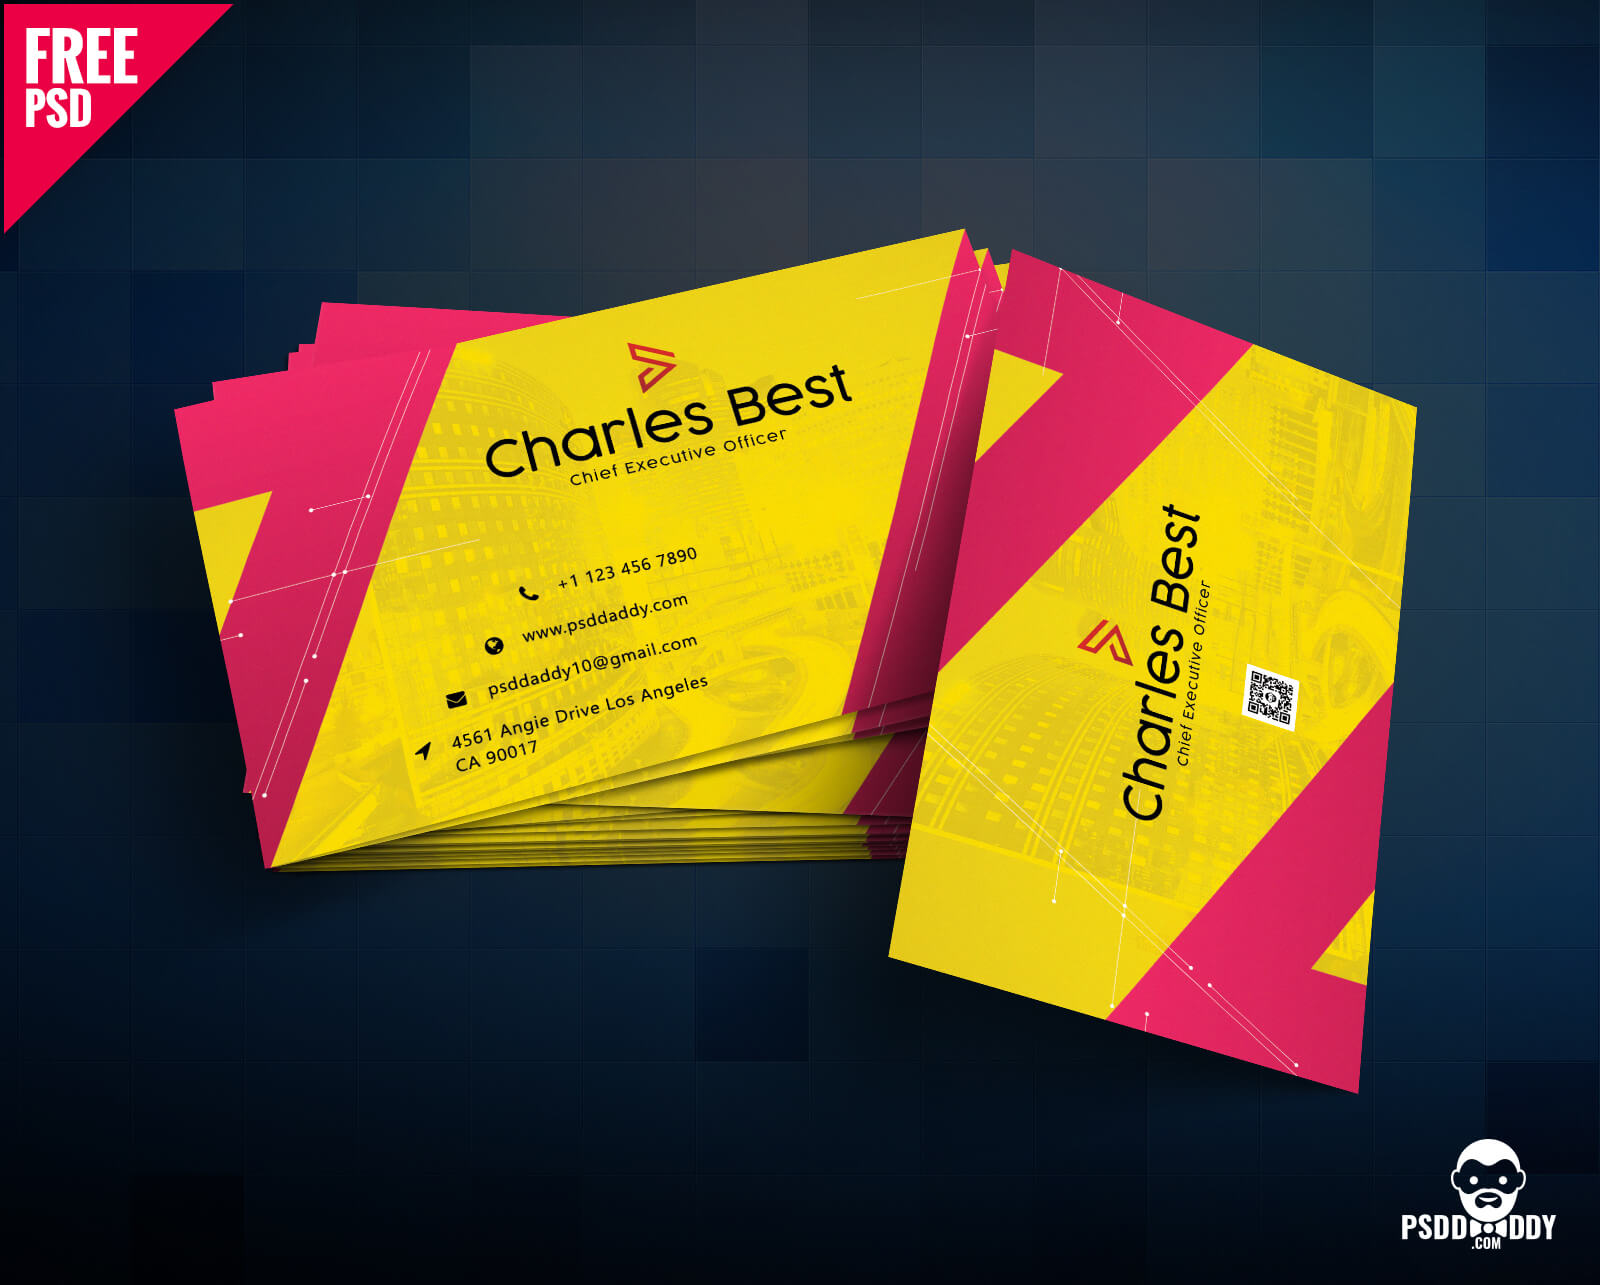 Download] Creative Business Card Free Psd | Psddaddy In Psd Visiting Card Templates